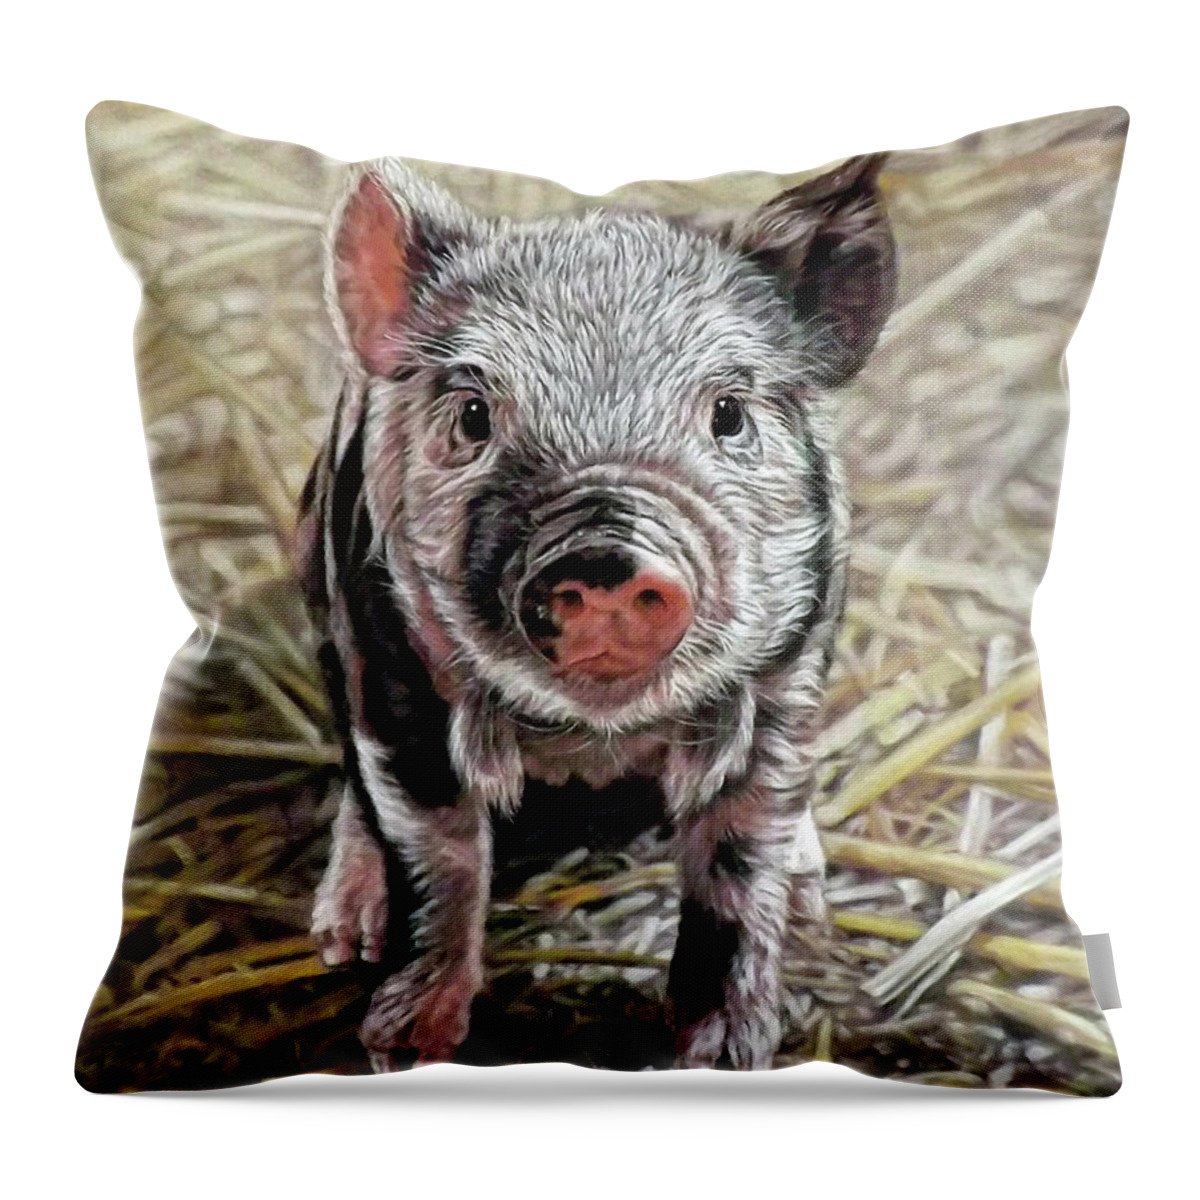 Pig Throw Pillow featuring the painting Piglet by Linda Becker